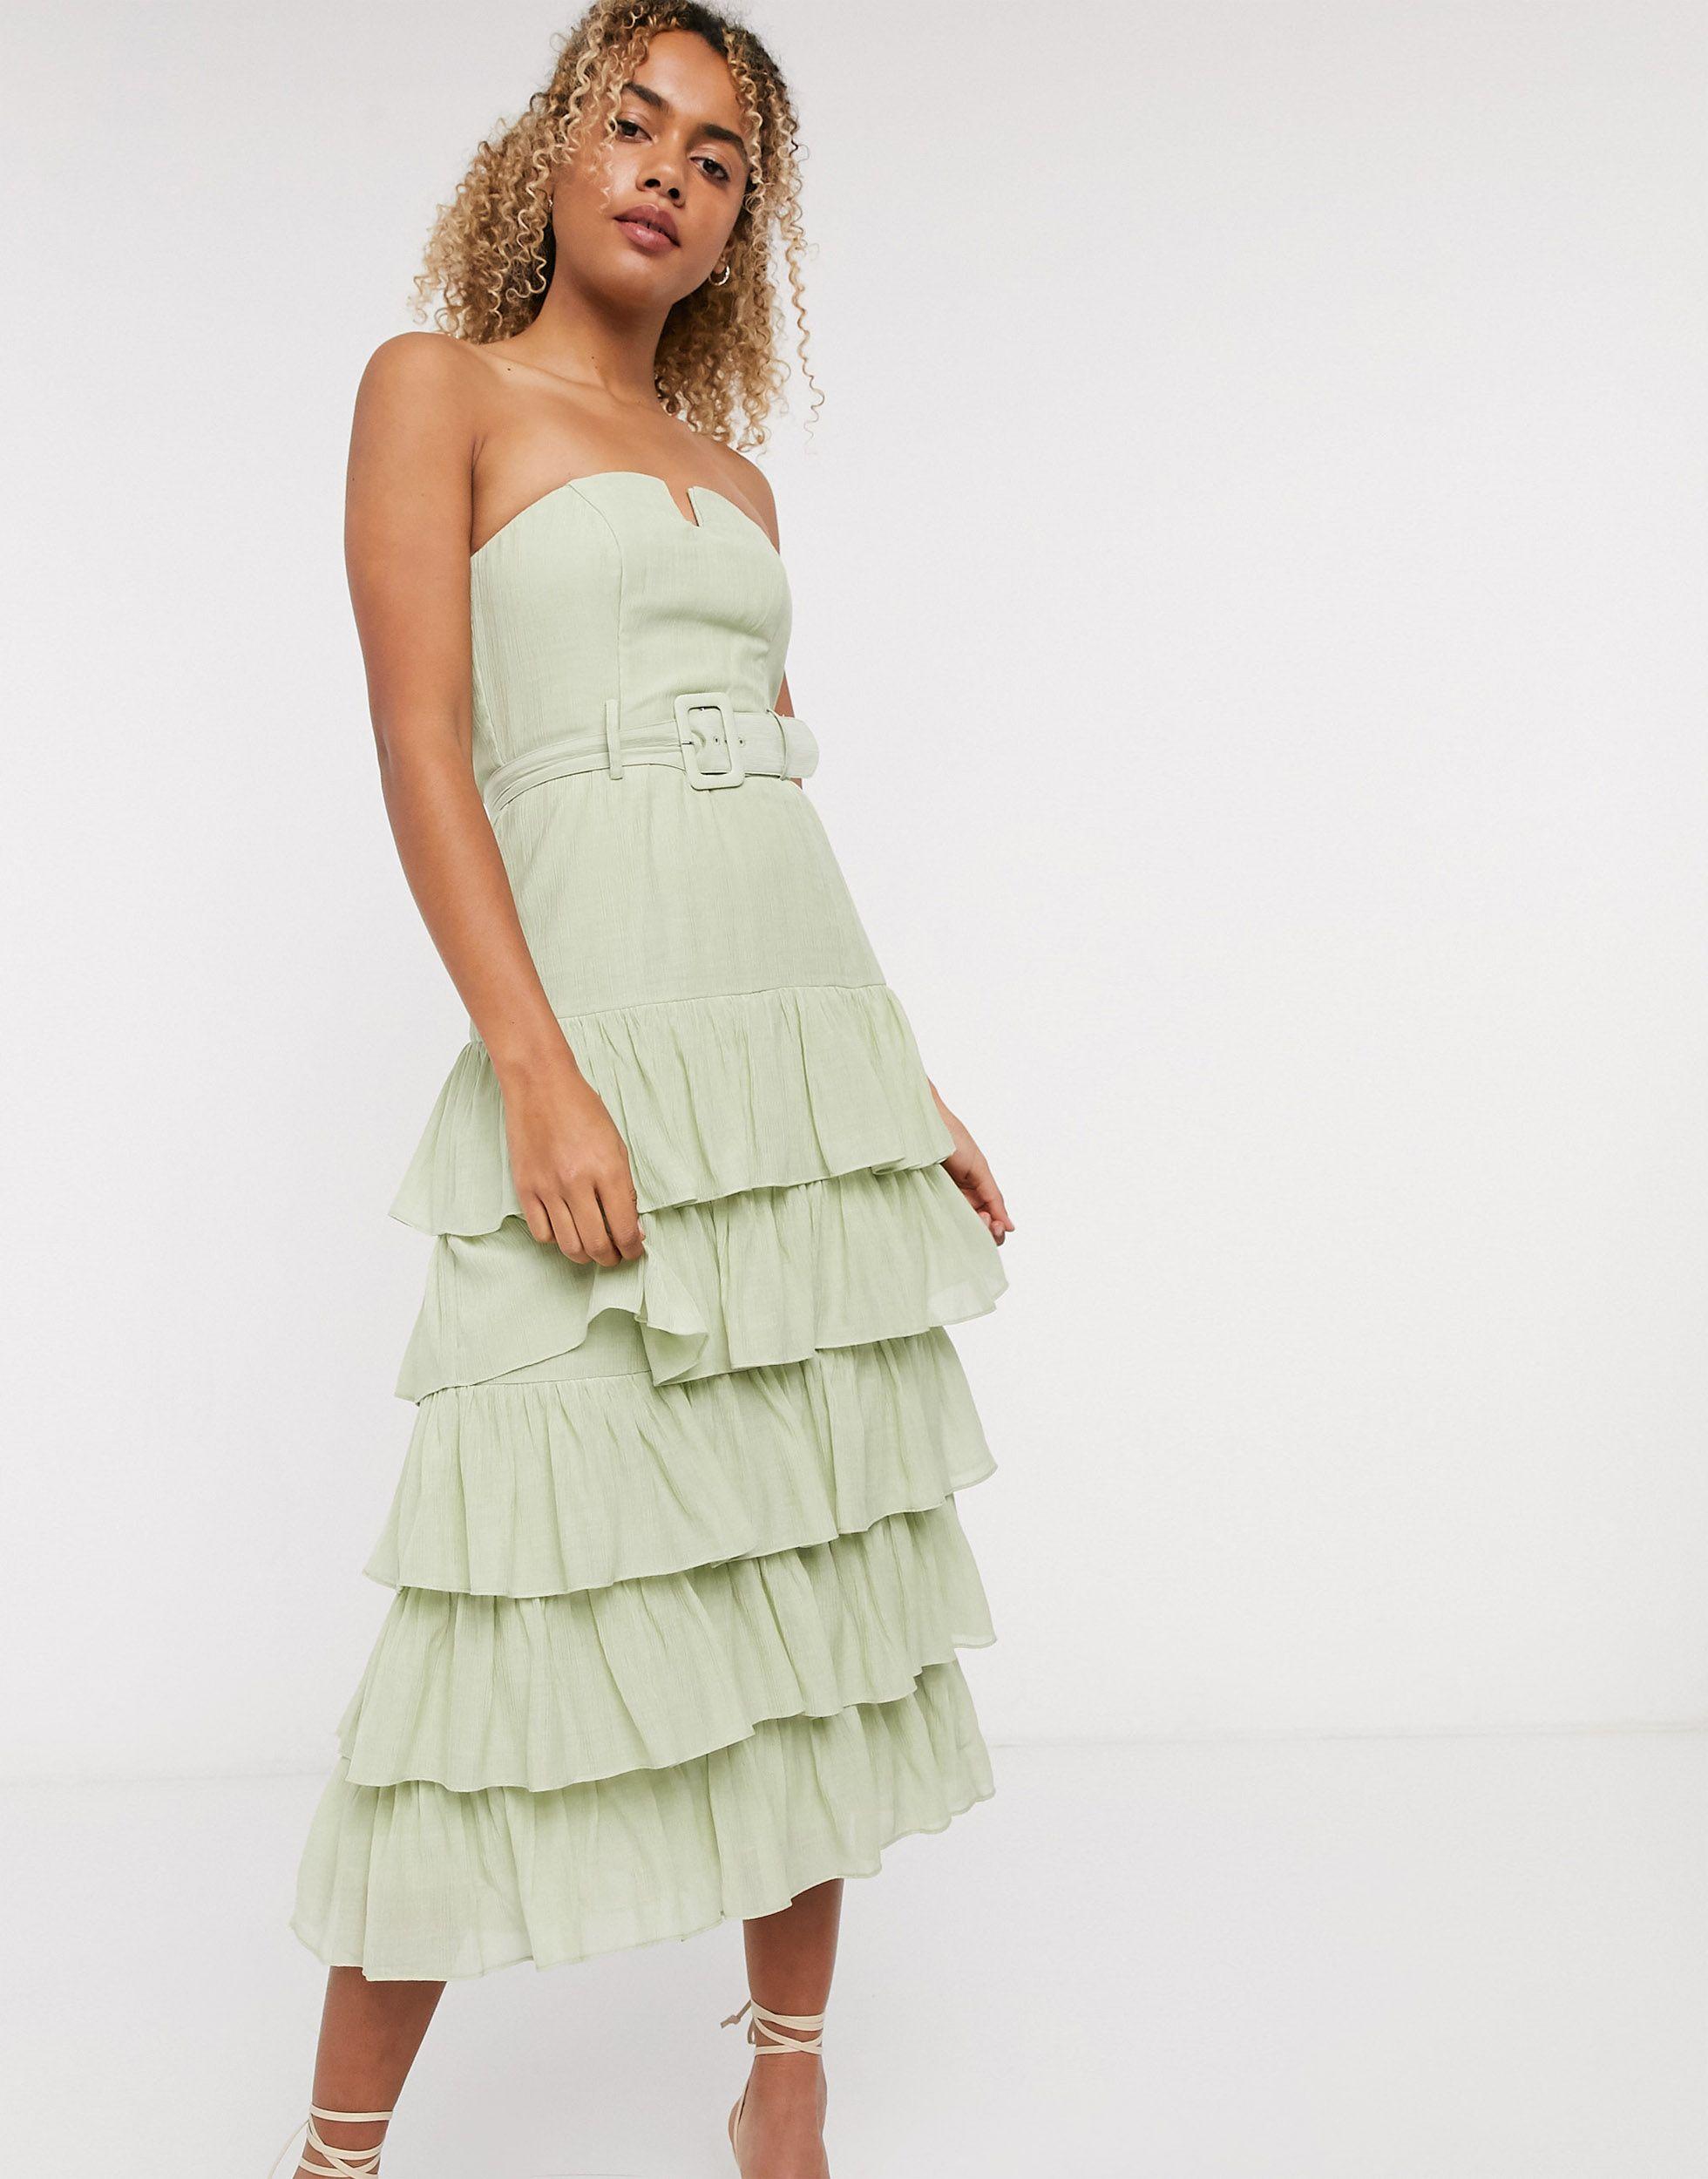 & Other Stories Ruffled Strapless Midi Dress in Green | Lyst